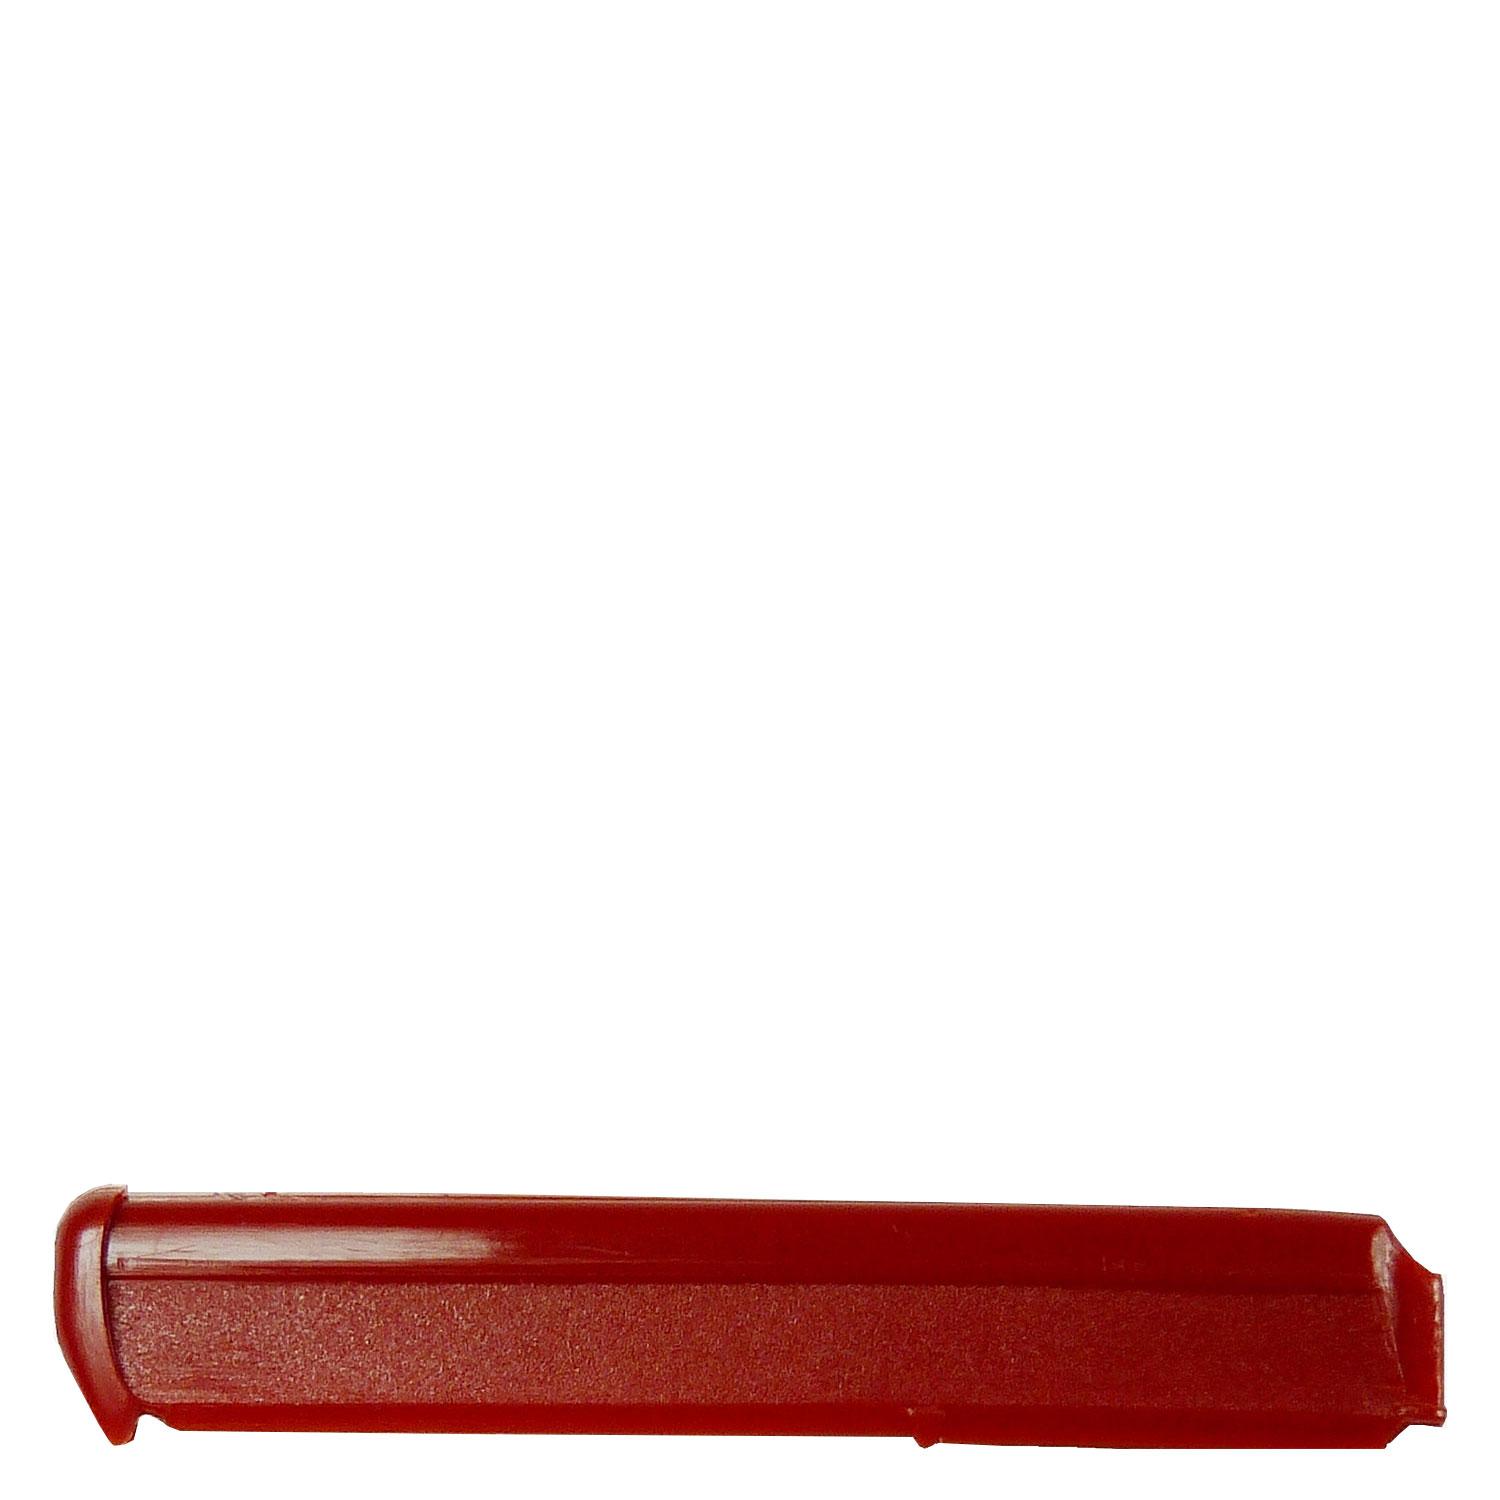 Tondeo Razor - Sifter Protection Red TCR